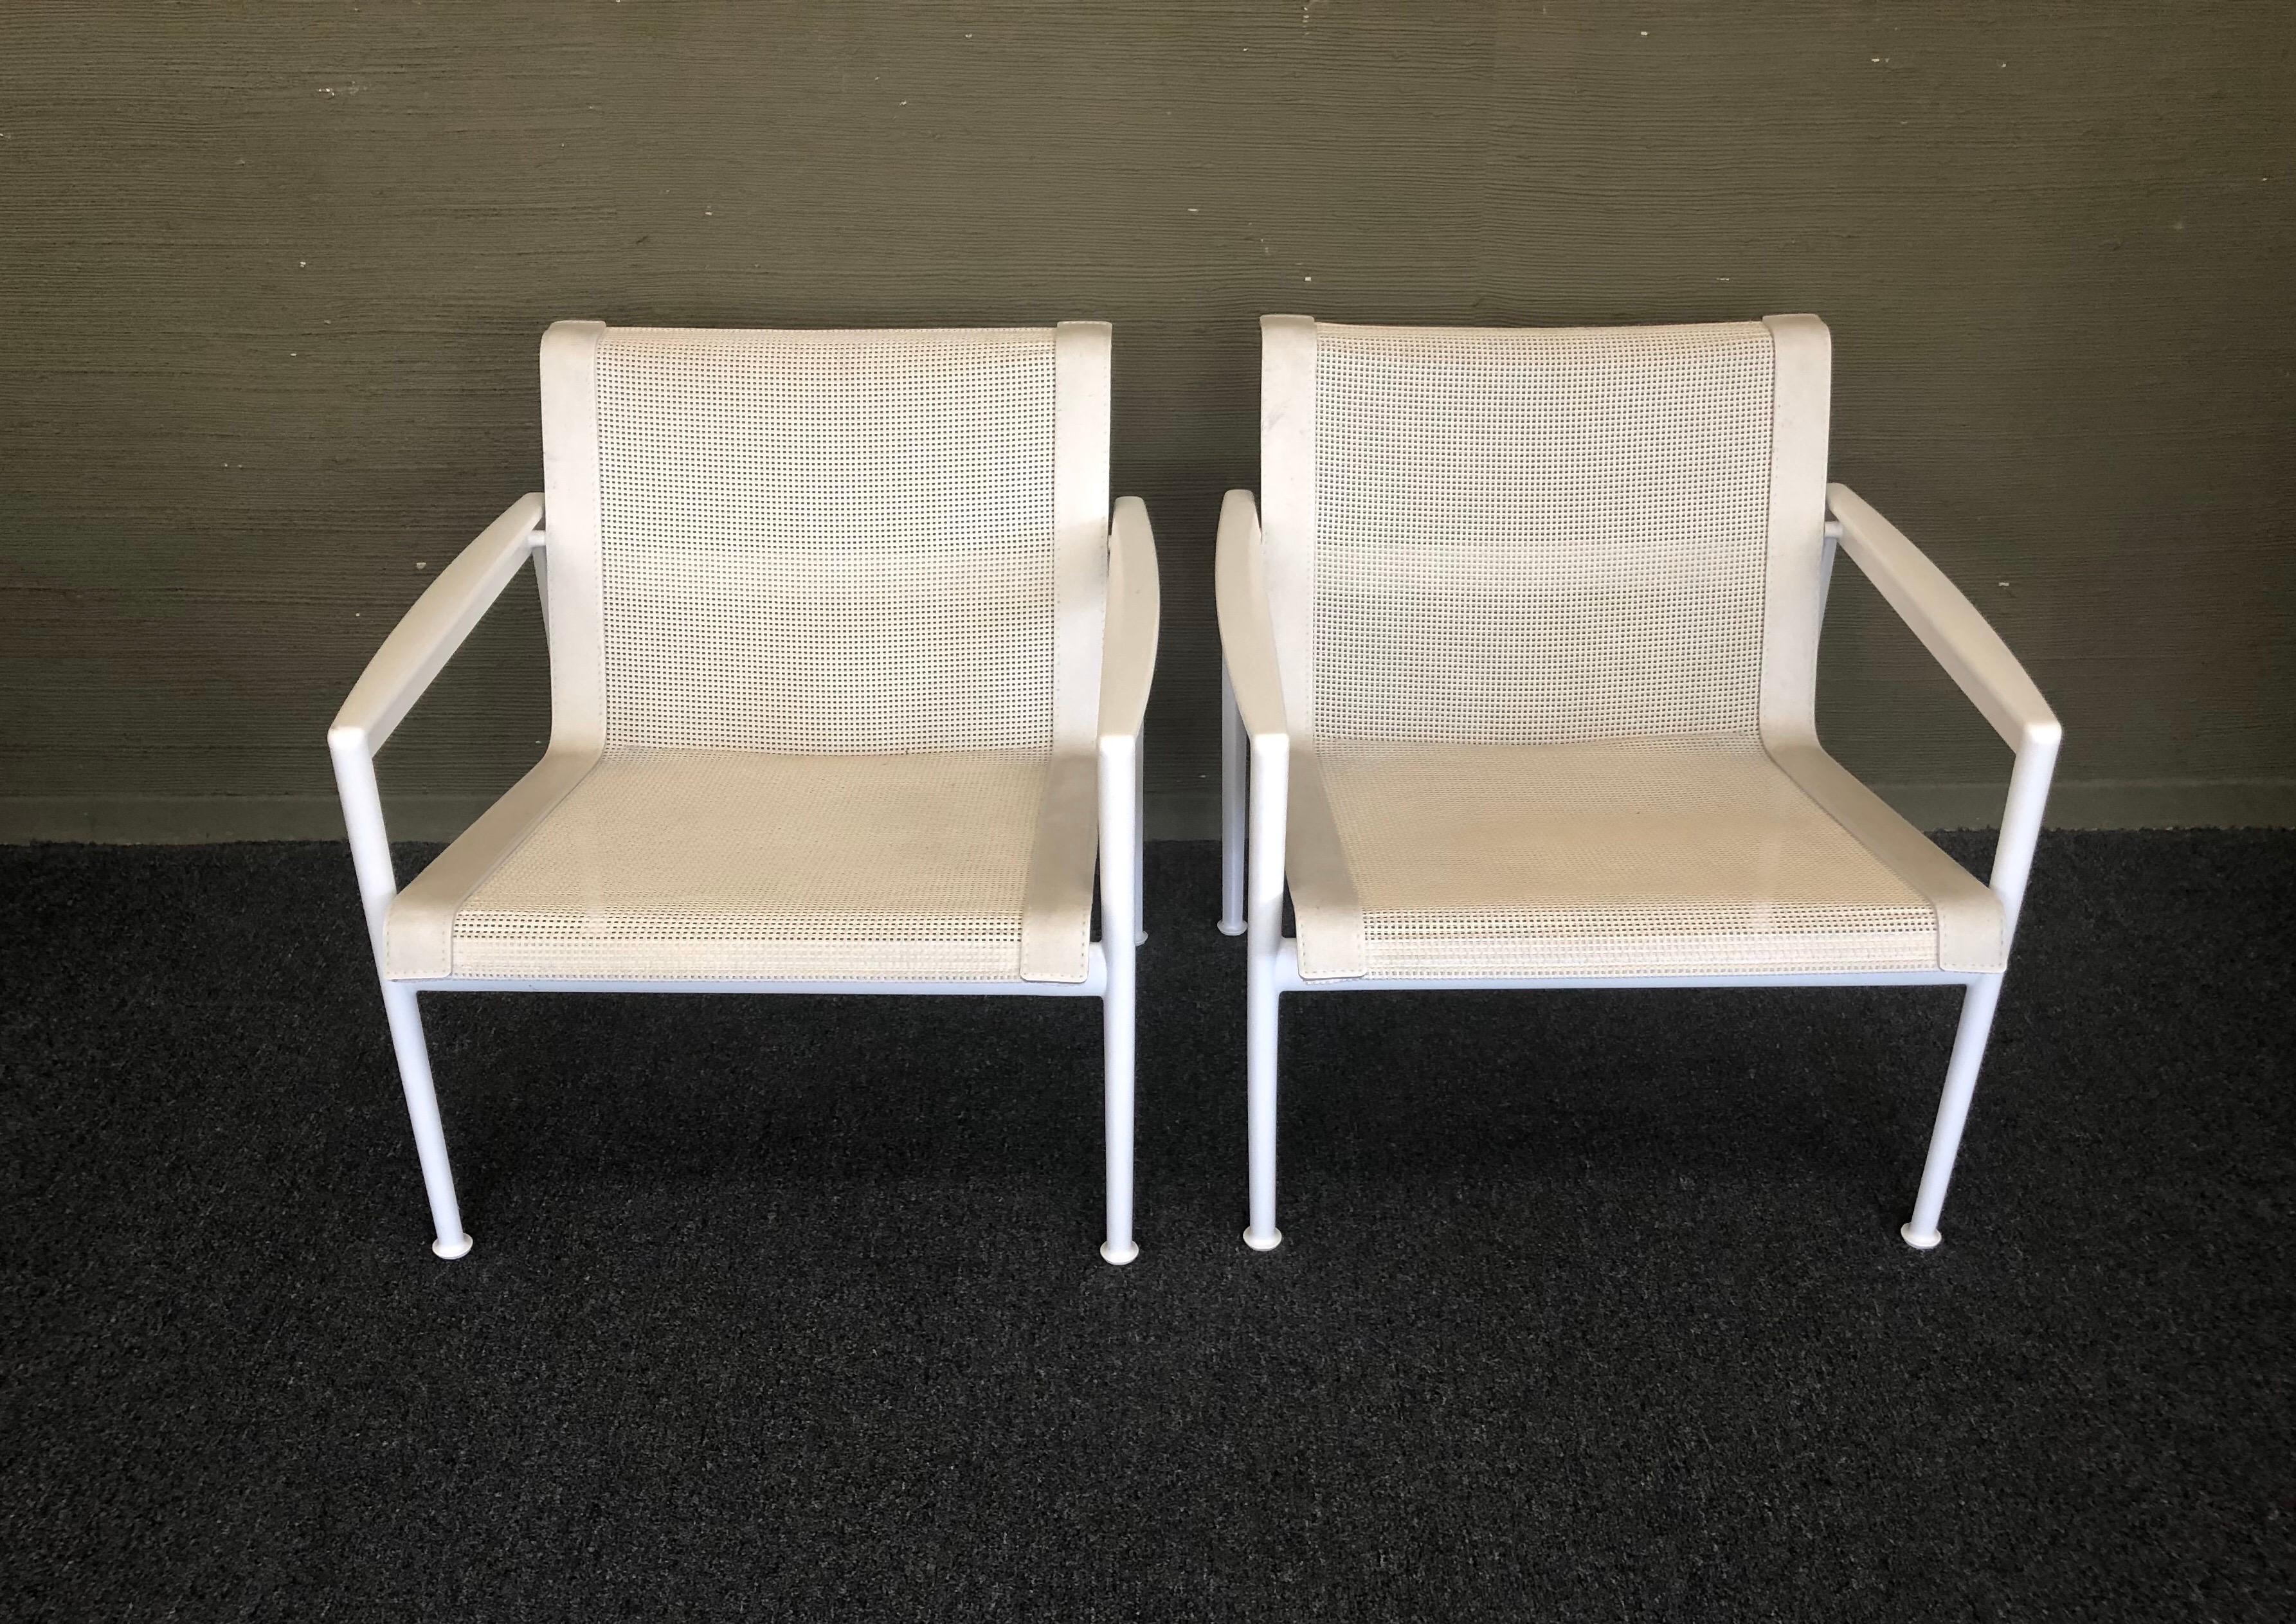 Handsome pair of sling lounge chairs with arms designed by Richard Schultz as part of his 1966 Collection for Knoll, circa 1990s. Craving furniture that could stand up to the salty environment of her seaside home in Florida, Florence Knoll called on